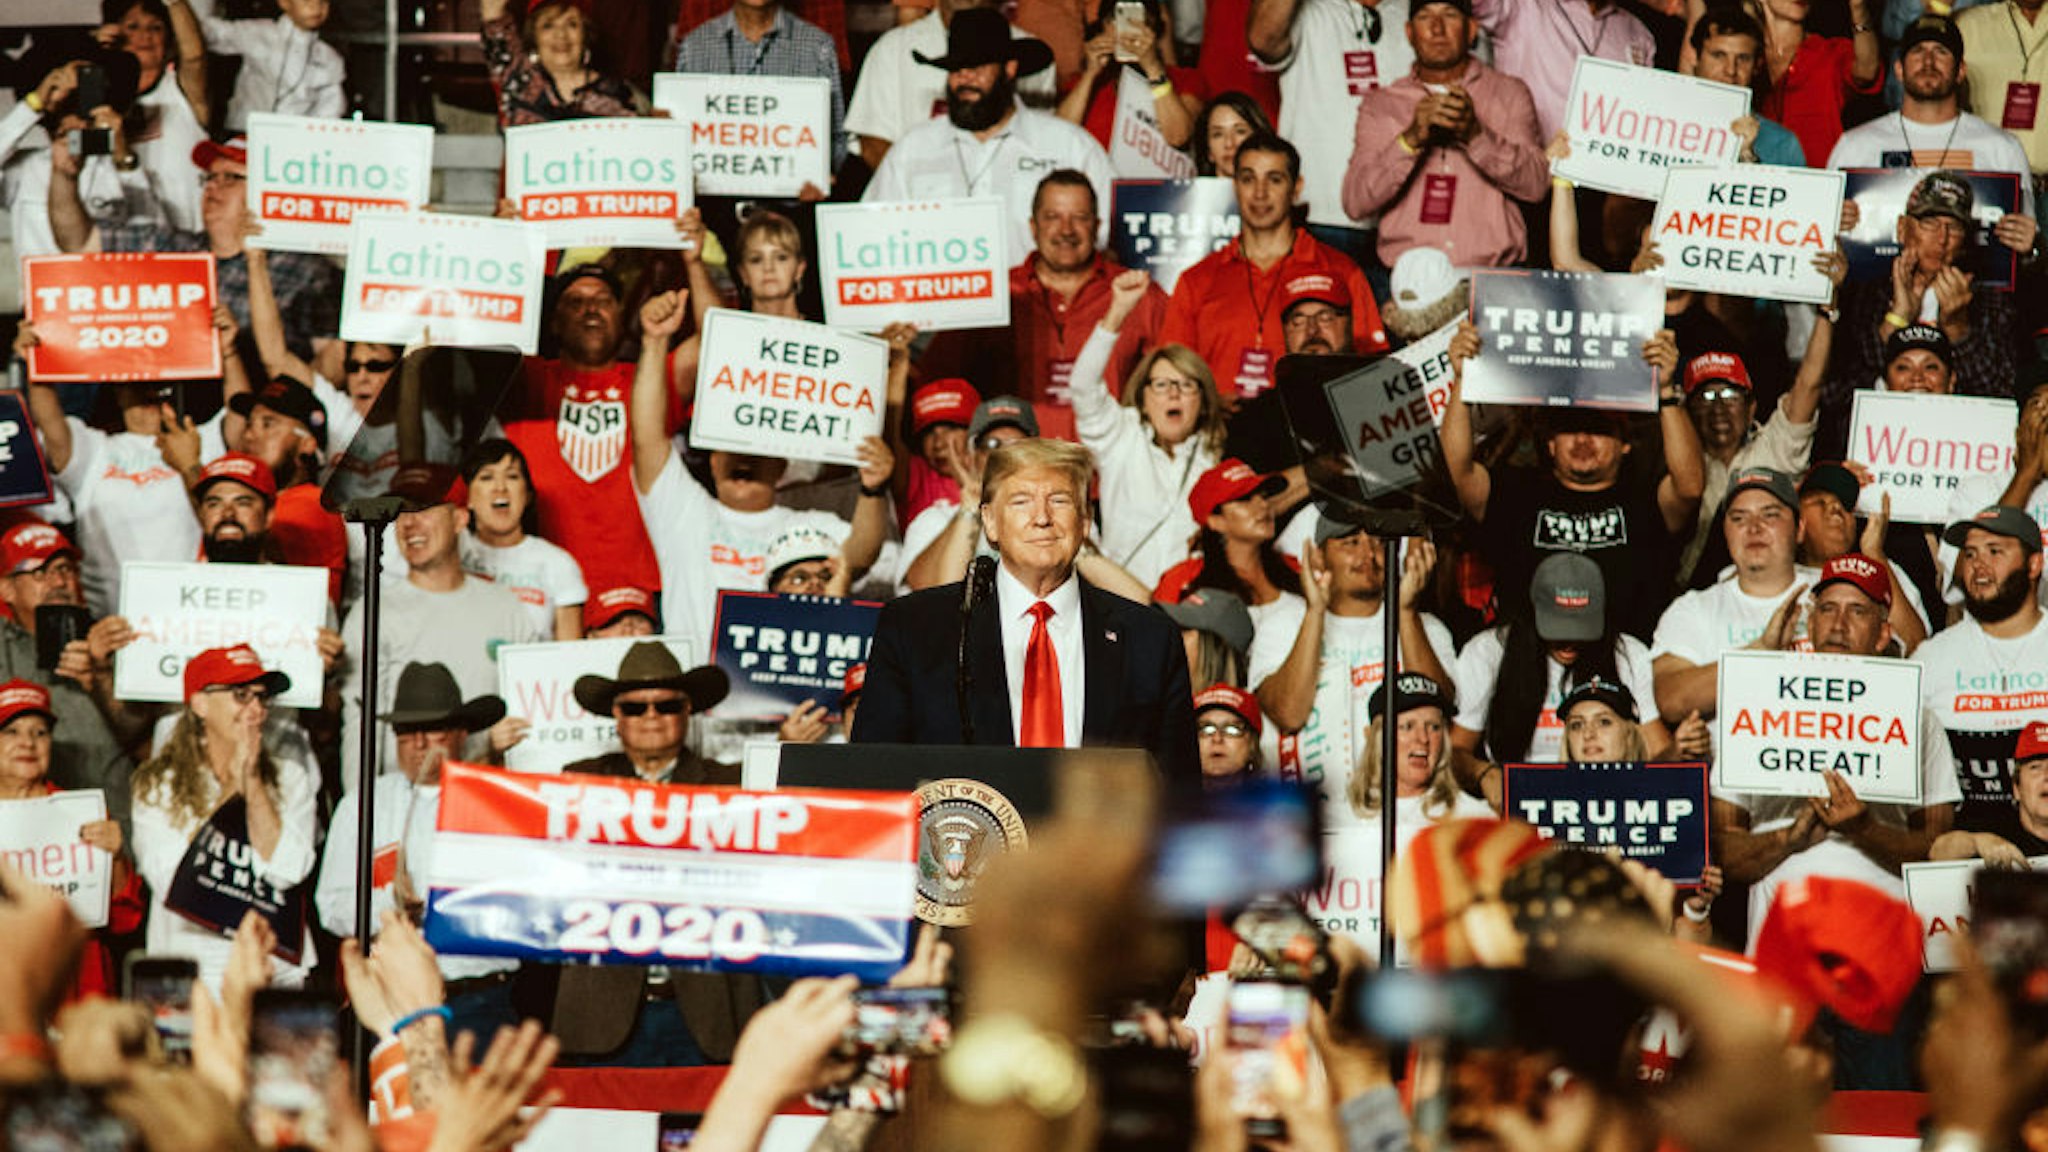 U.S. President Donald Trump, center, smiles during a rally in Rio Rancho, New Mexico, U.S., on Monday, Sept. 16, 2019.